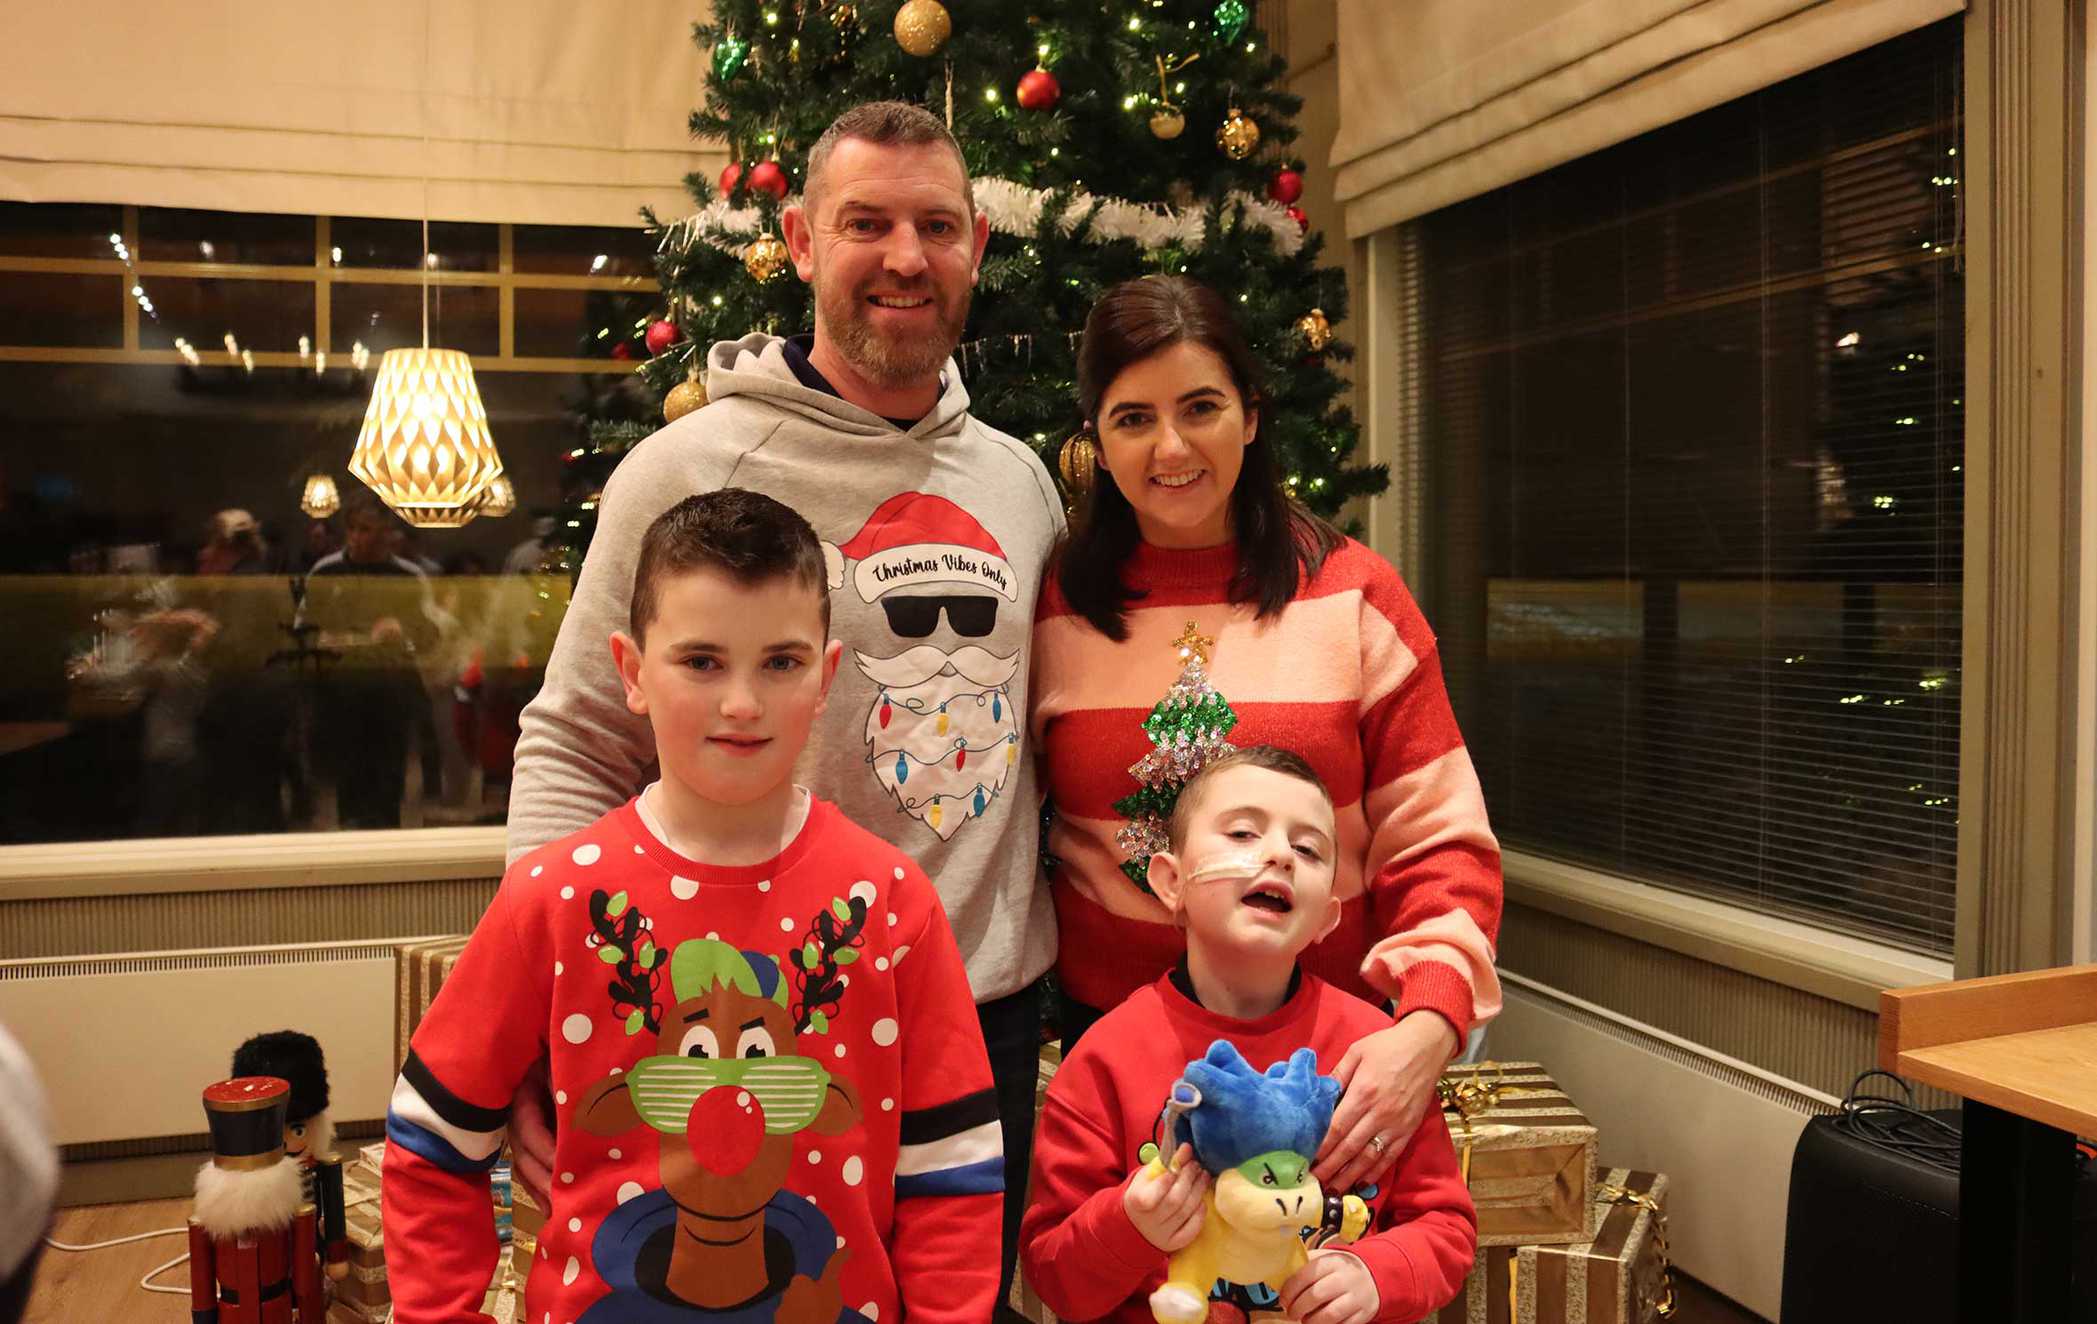 Tíernan standing in front of a Christmas tree with his mum, dad and brother, all earing Christmas jumpers.